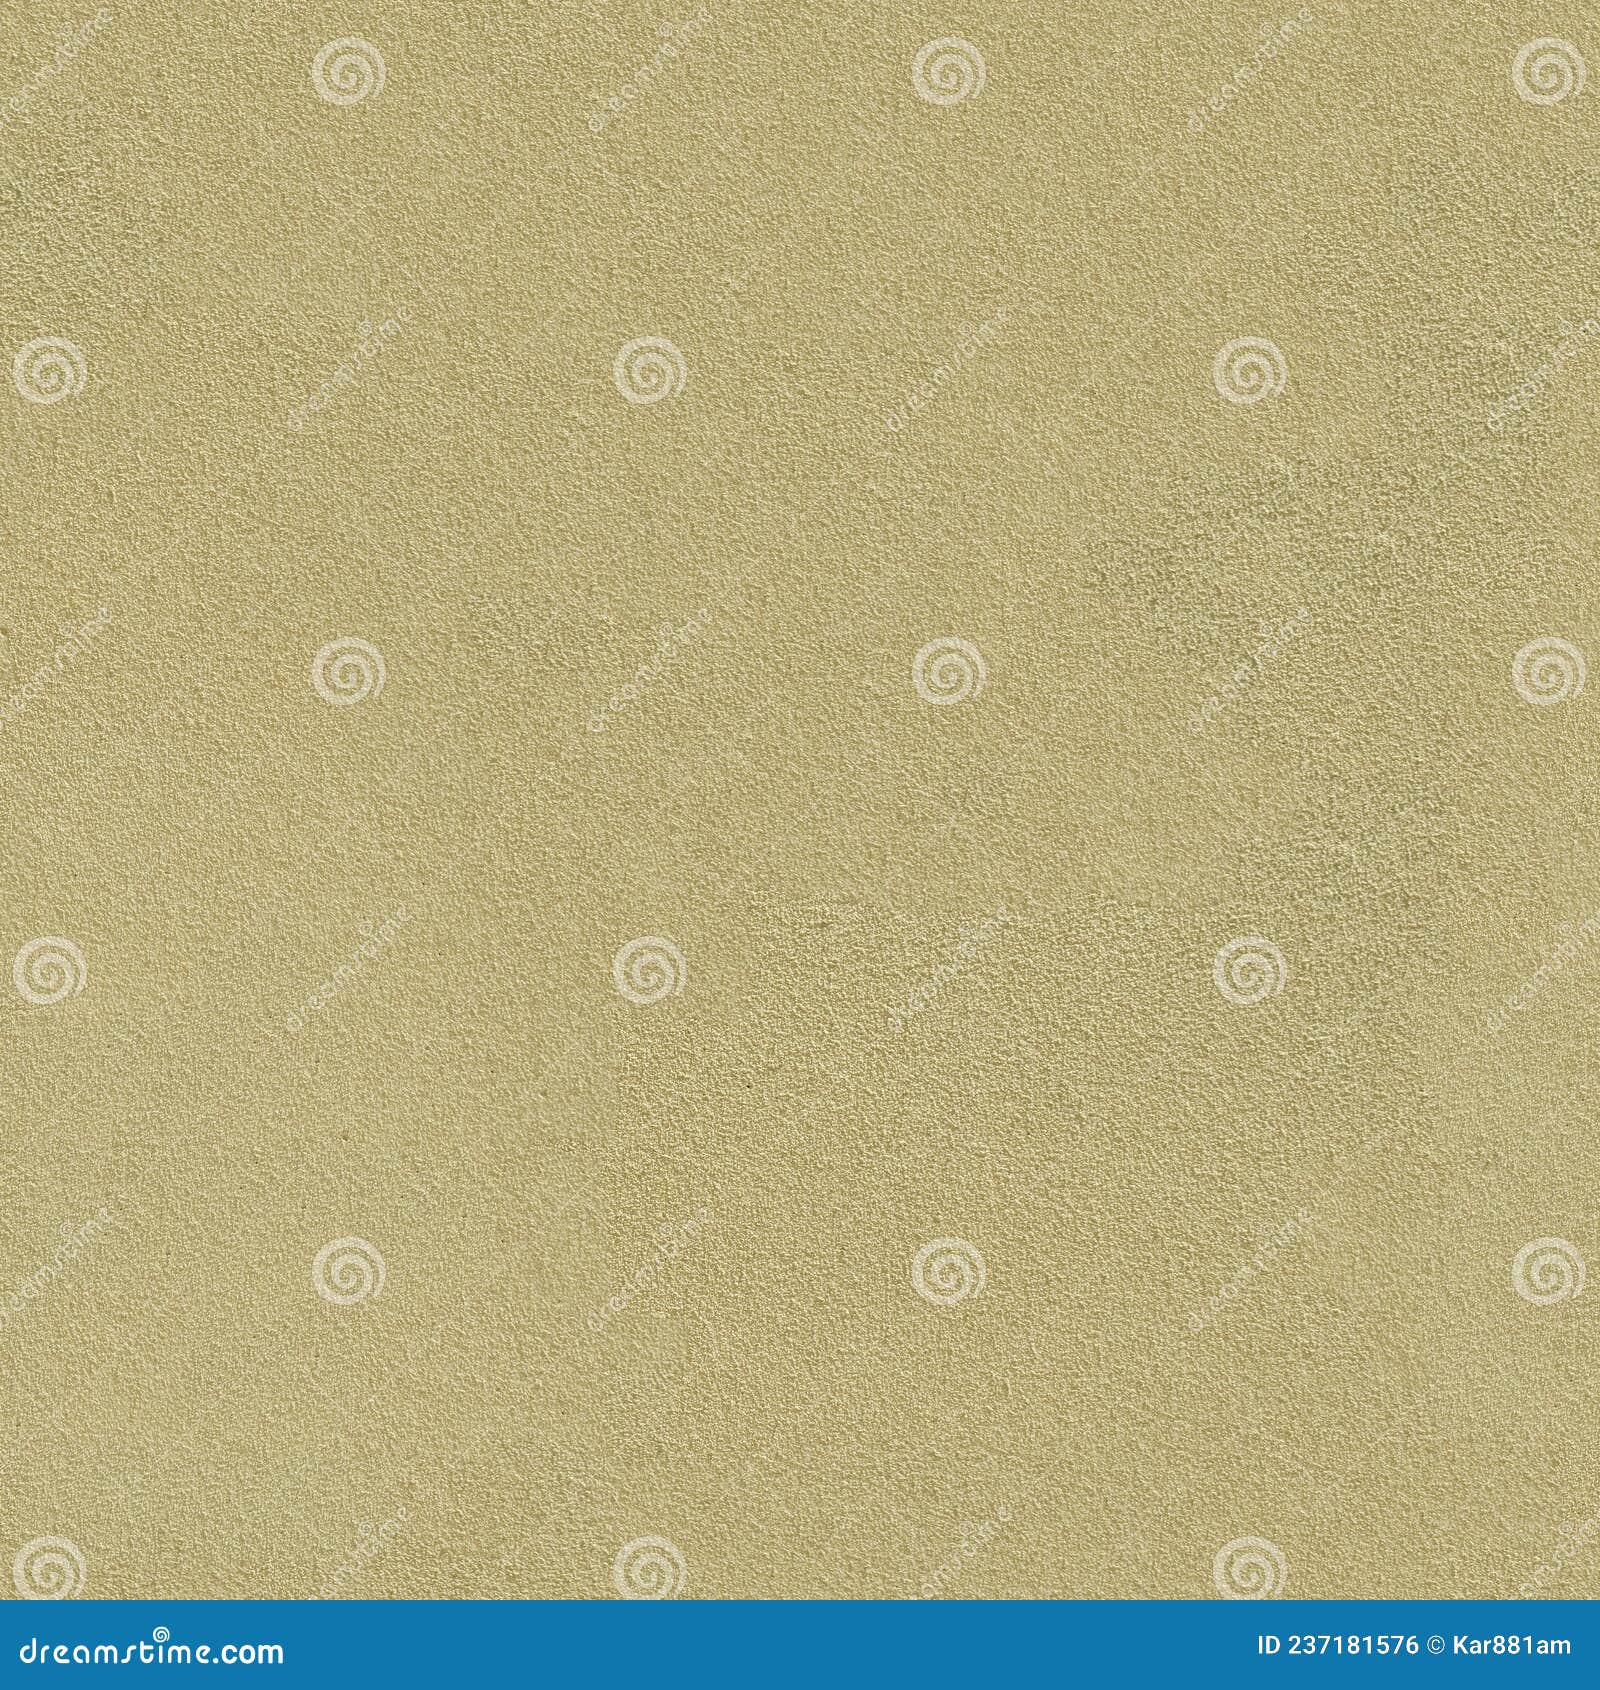 Texture Wall Plaster. Background High Quality Stock Photo - Image of ...